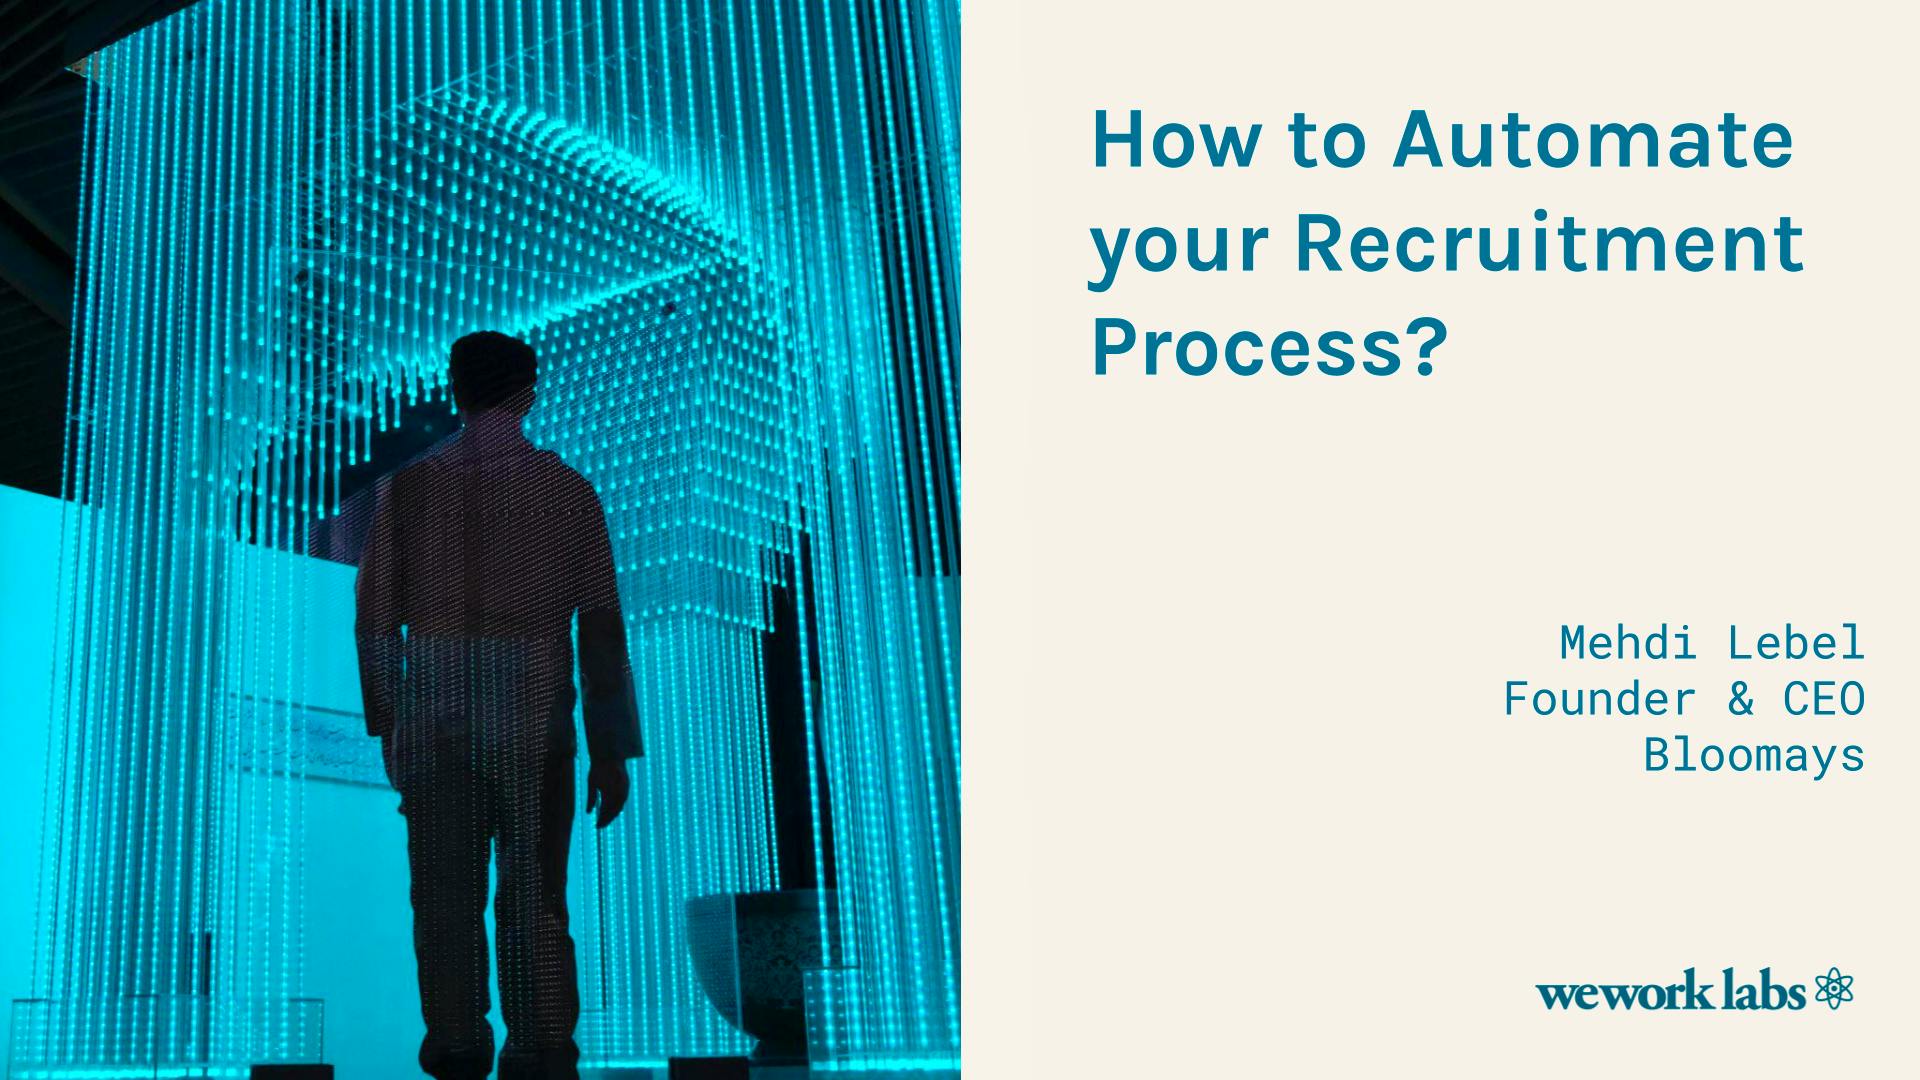 Recruiting Series: How to Automate your Recruitment Process? on May 19, 2022